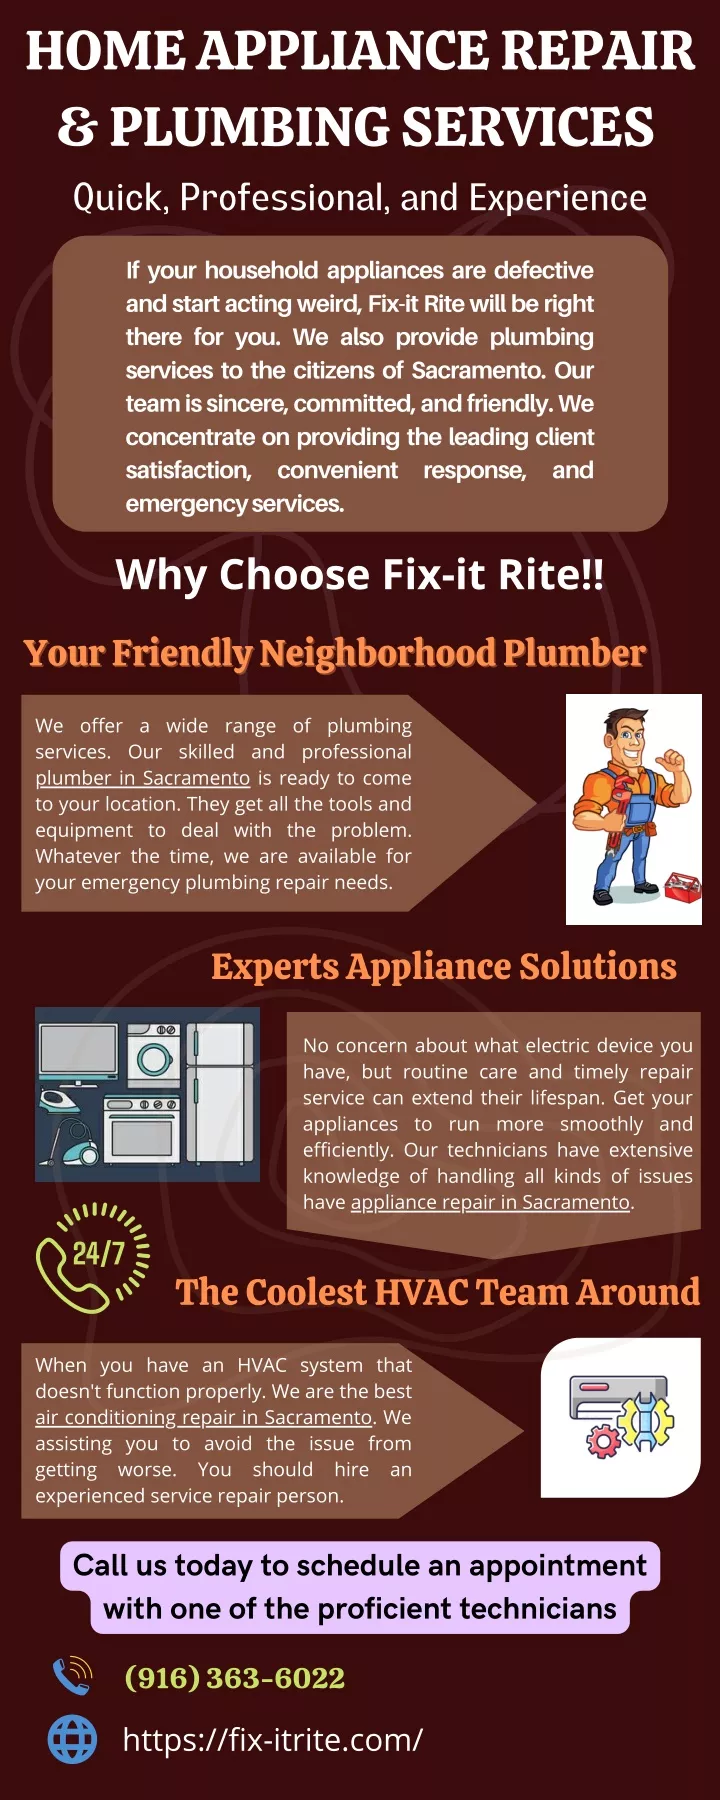 home appliance repair plumbing services quick